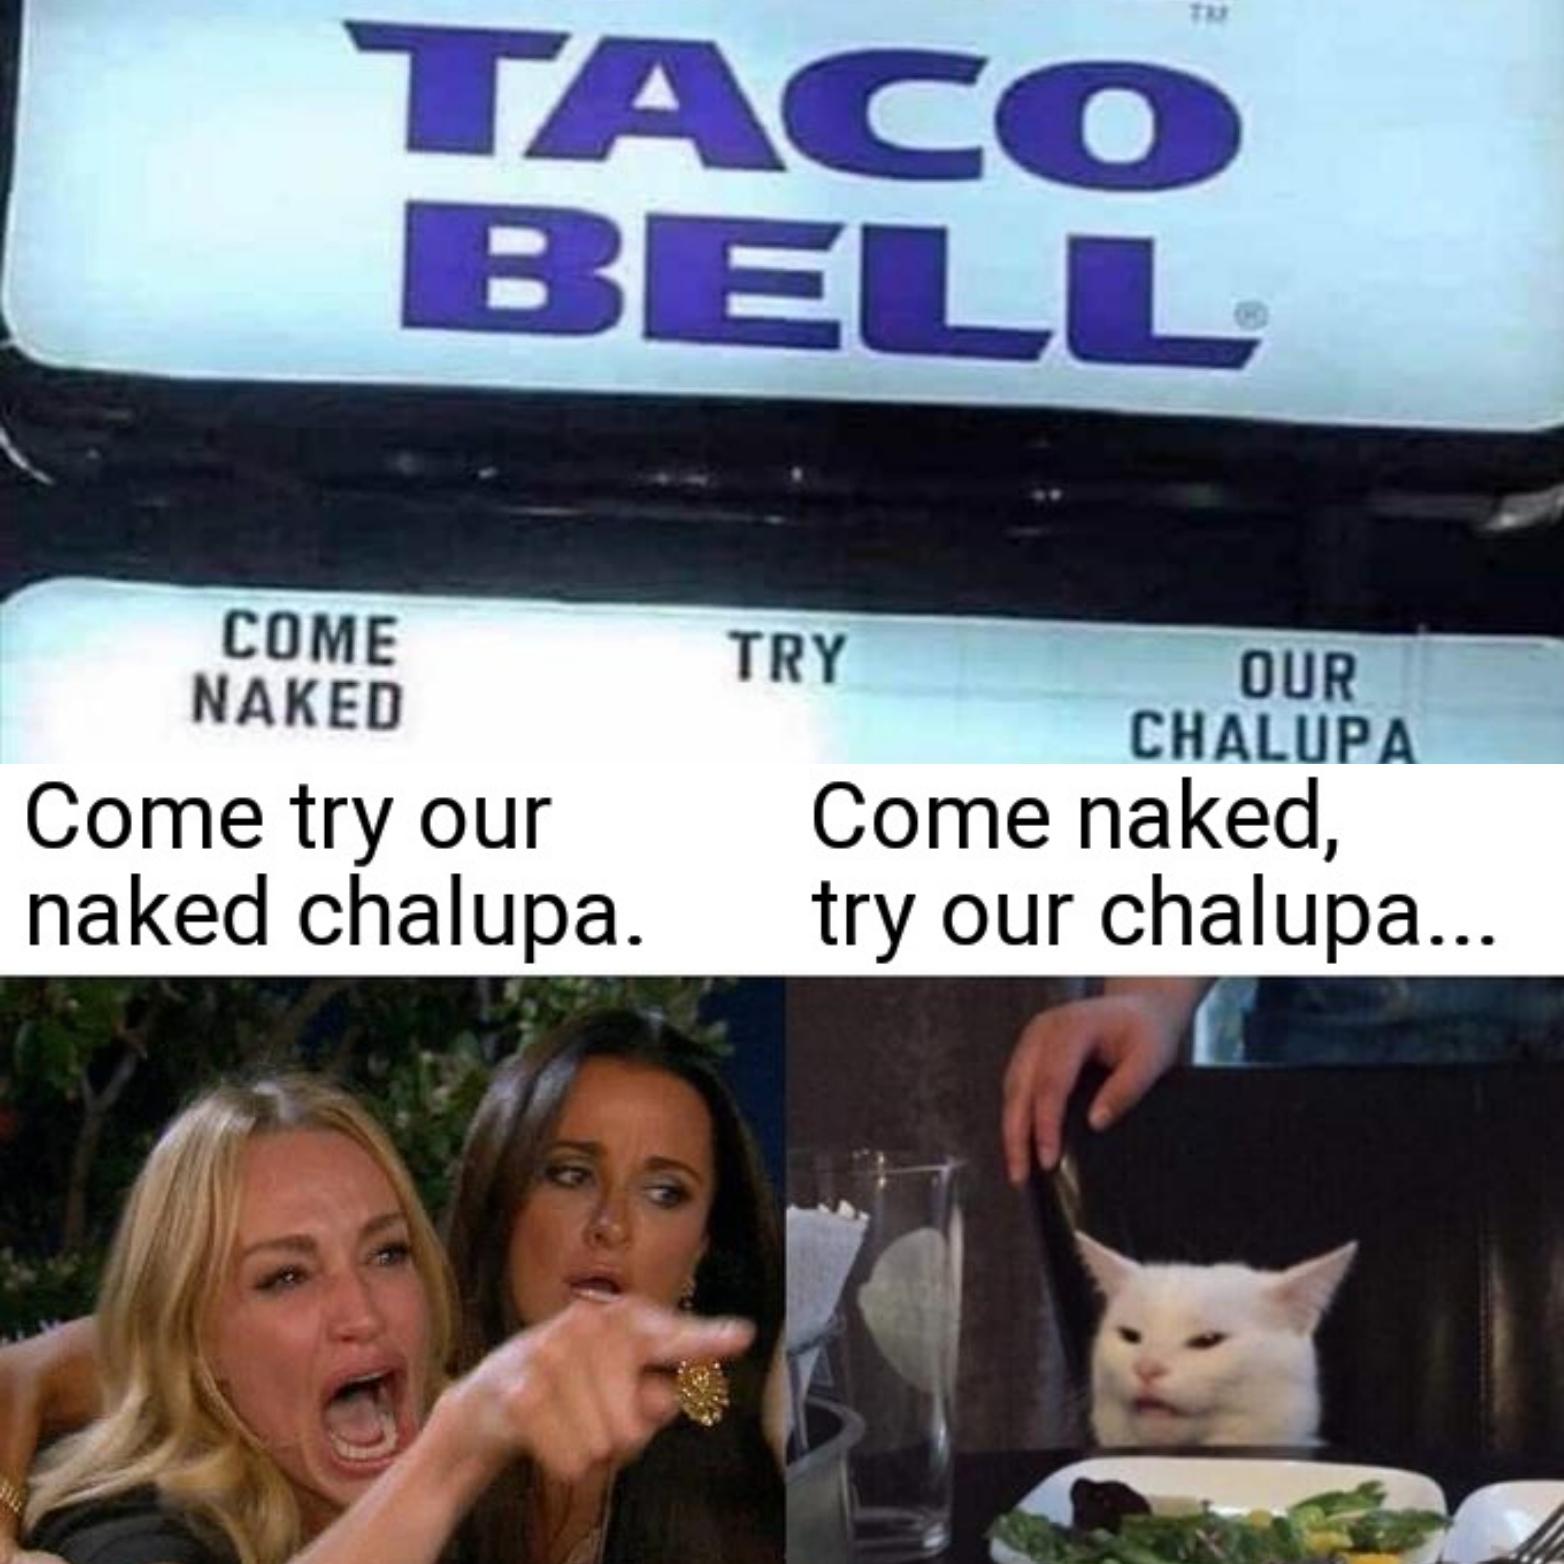 funny memes - dank memes -funny cat memes - Taco Bell Come Naked Come try our naked chalupa. Try Our Chalupa. Come naked, try our chalupa...